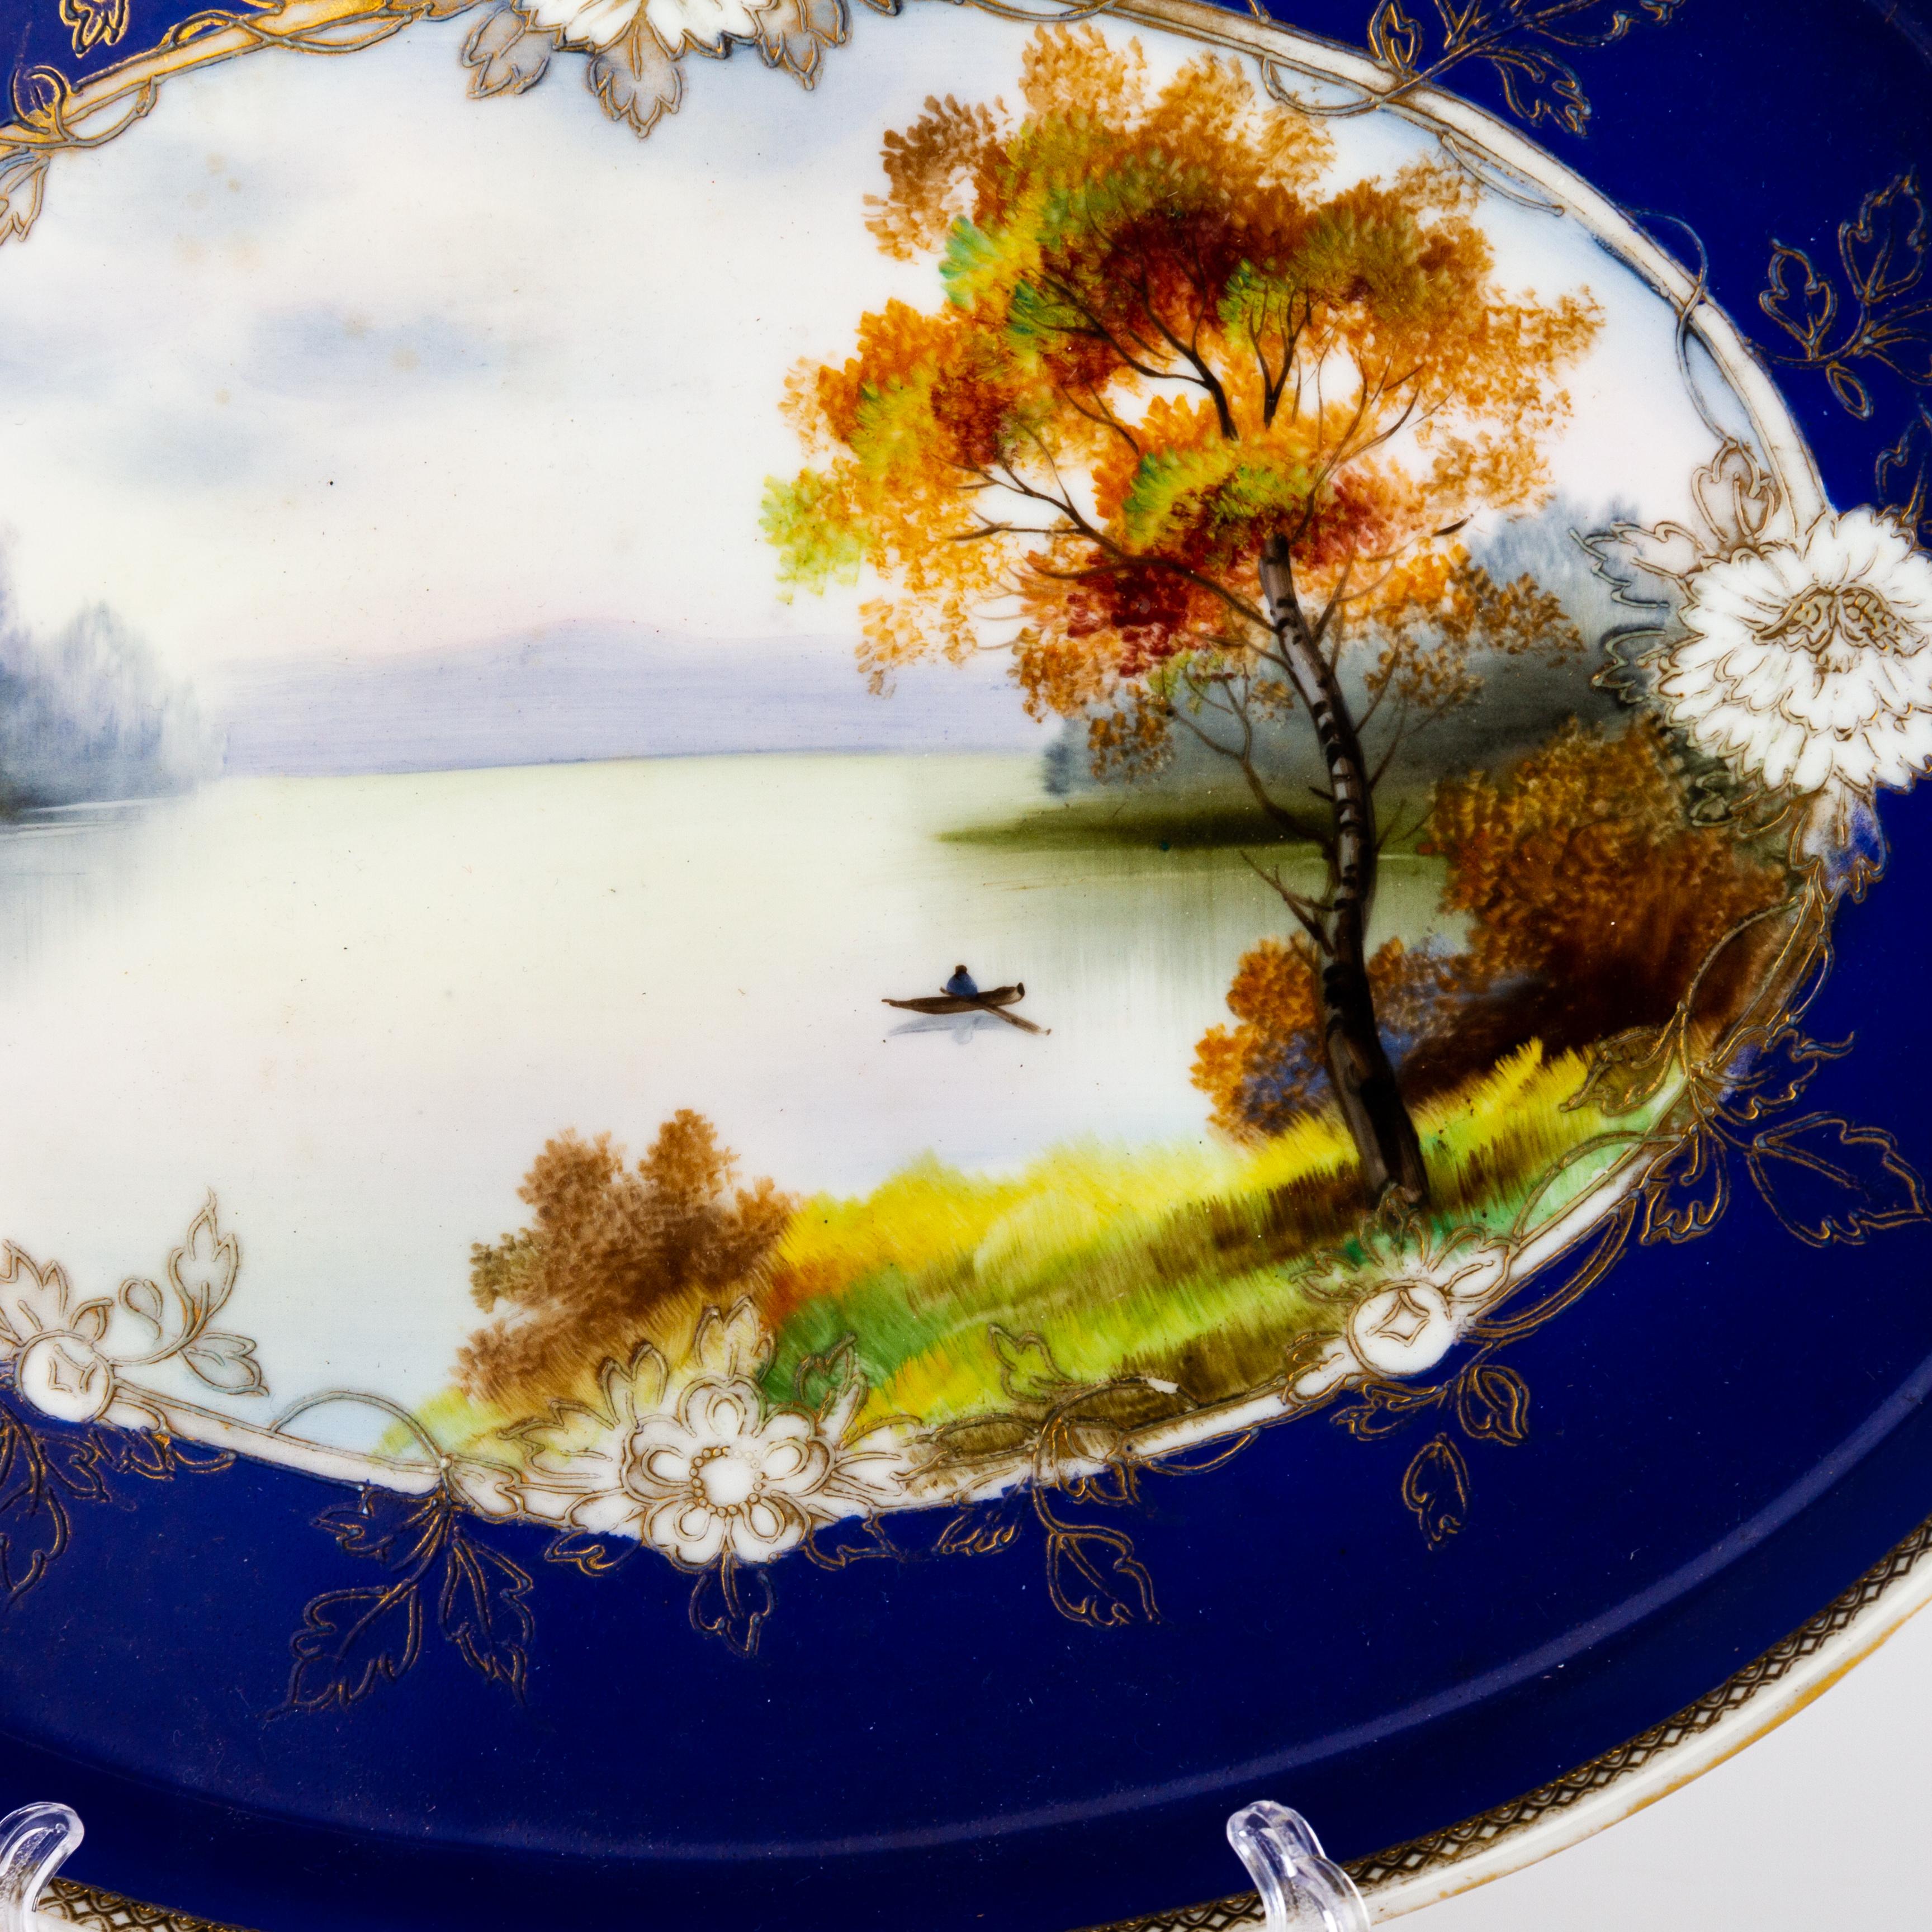 Noritake Japanese Art Deco Porcelain Oval Tray Plate
Good condition
Free international shipping.